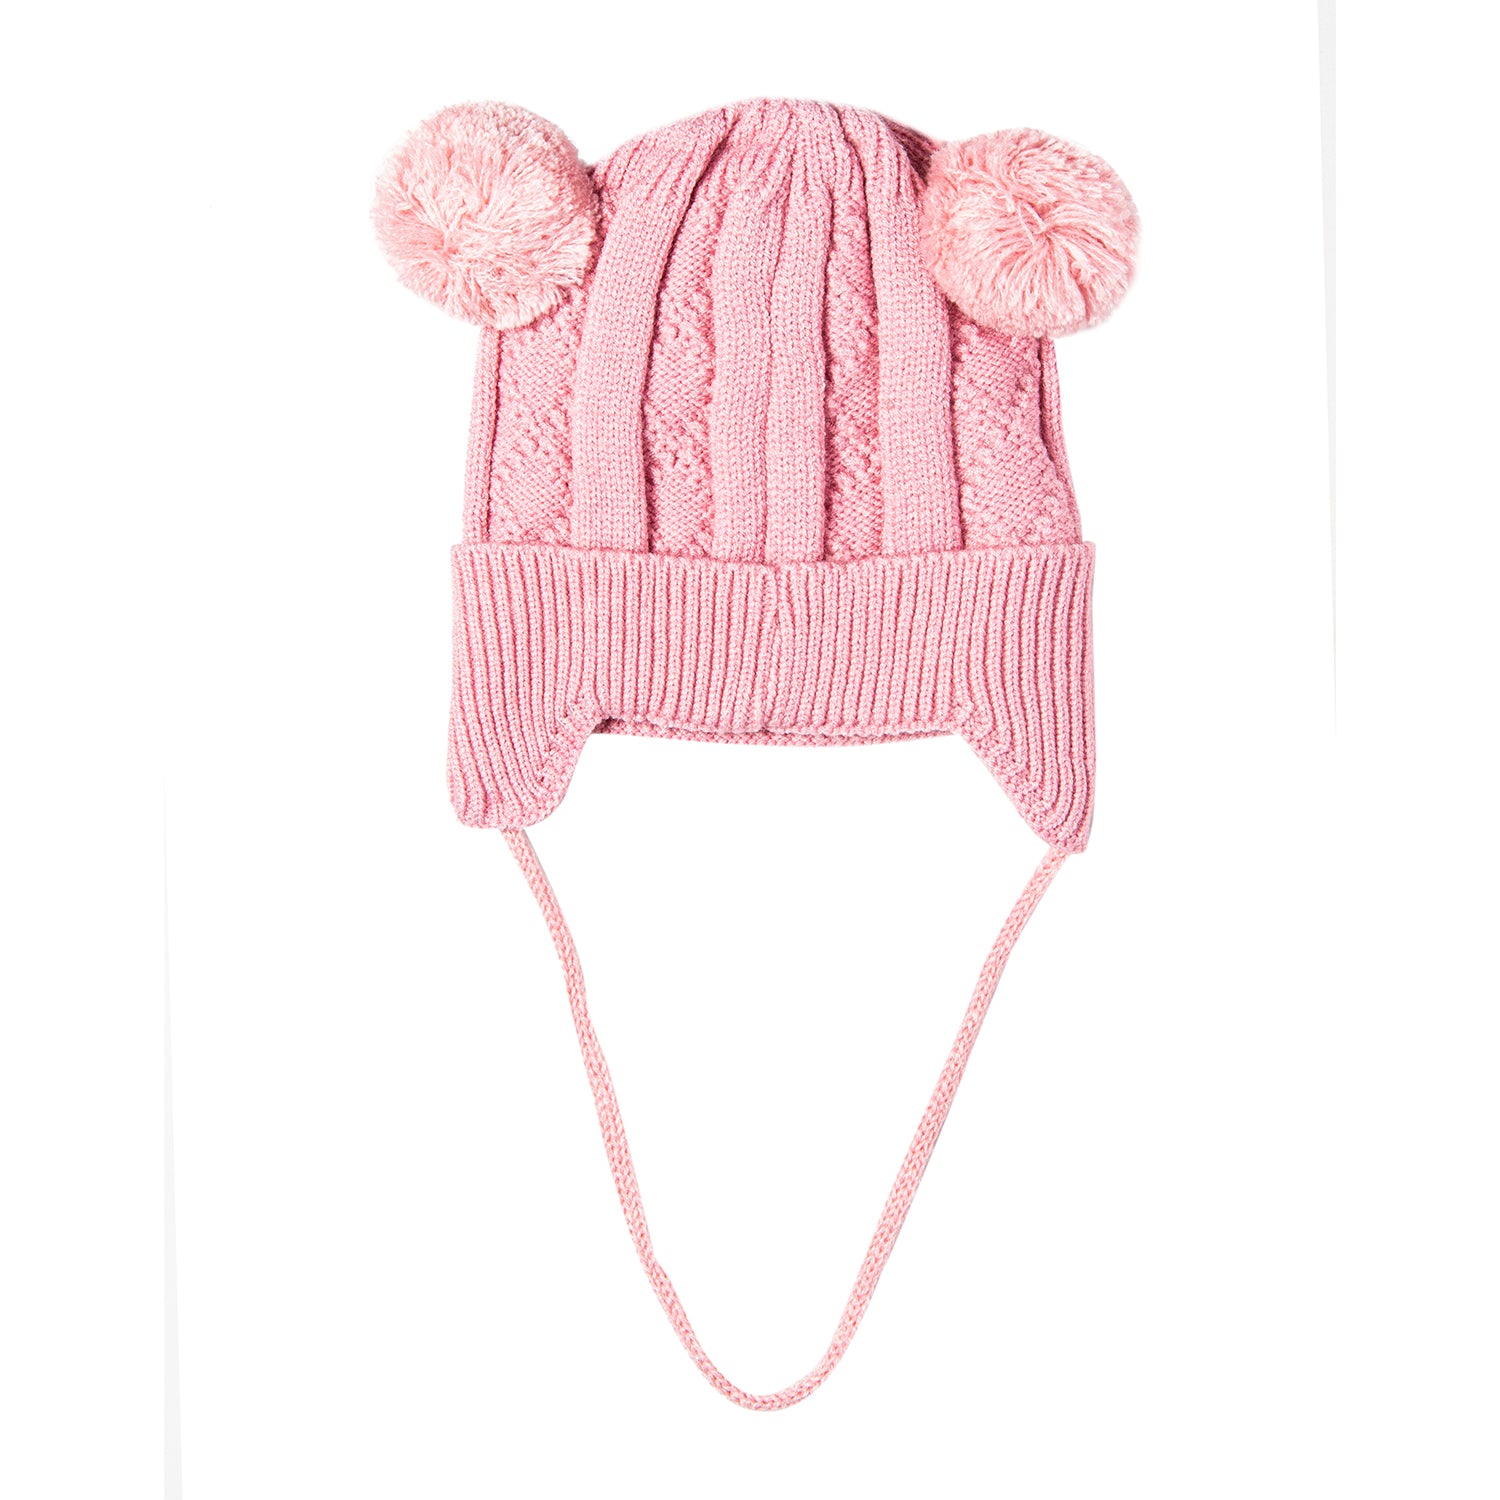 Knit Woollen Cap With Tie For Ear Cover Starry Pom Pom Pink - Baby Moo